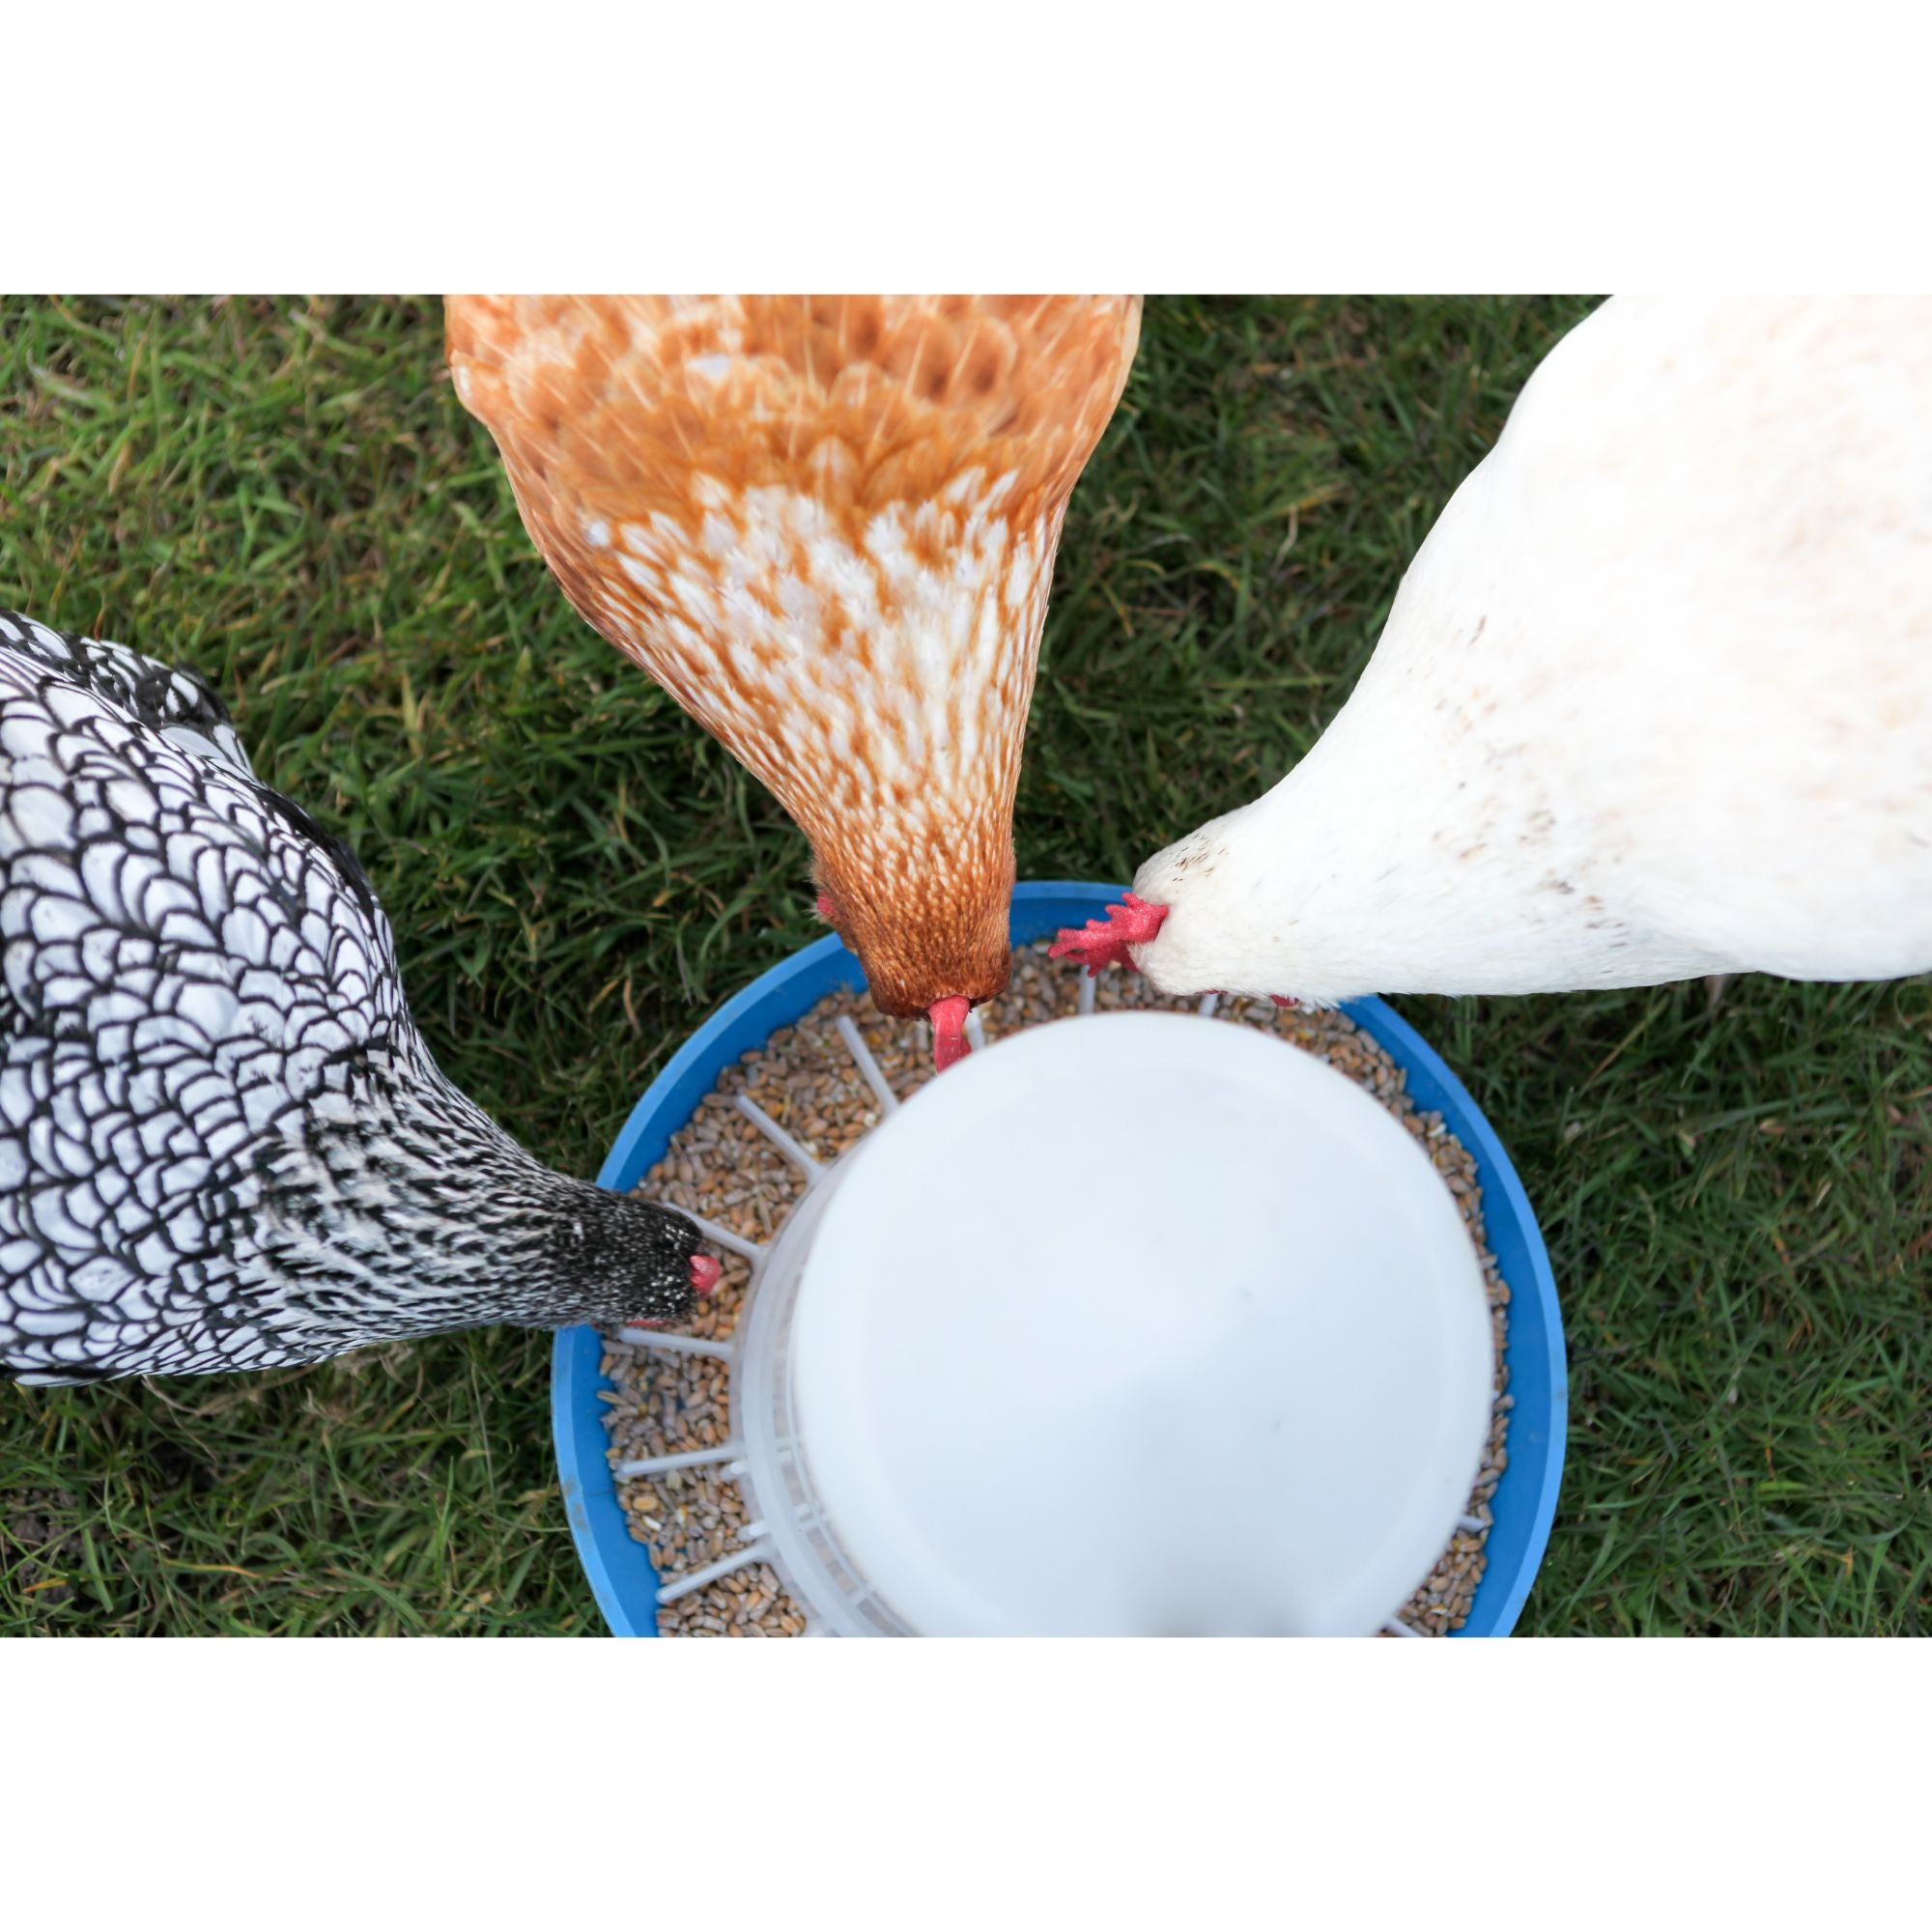 Chicken feeders and waterers can be placed either in or outside the coop